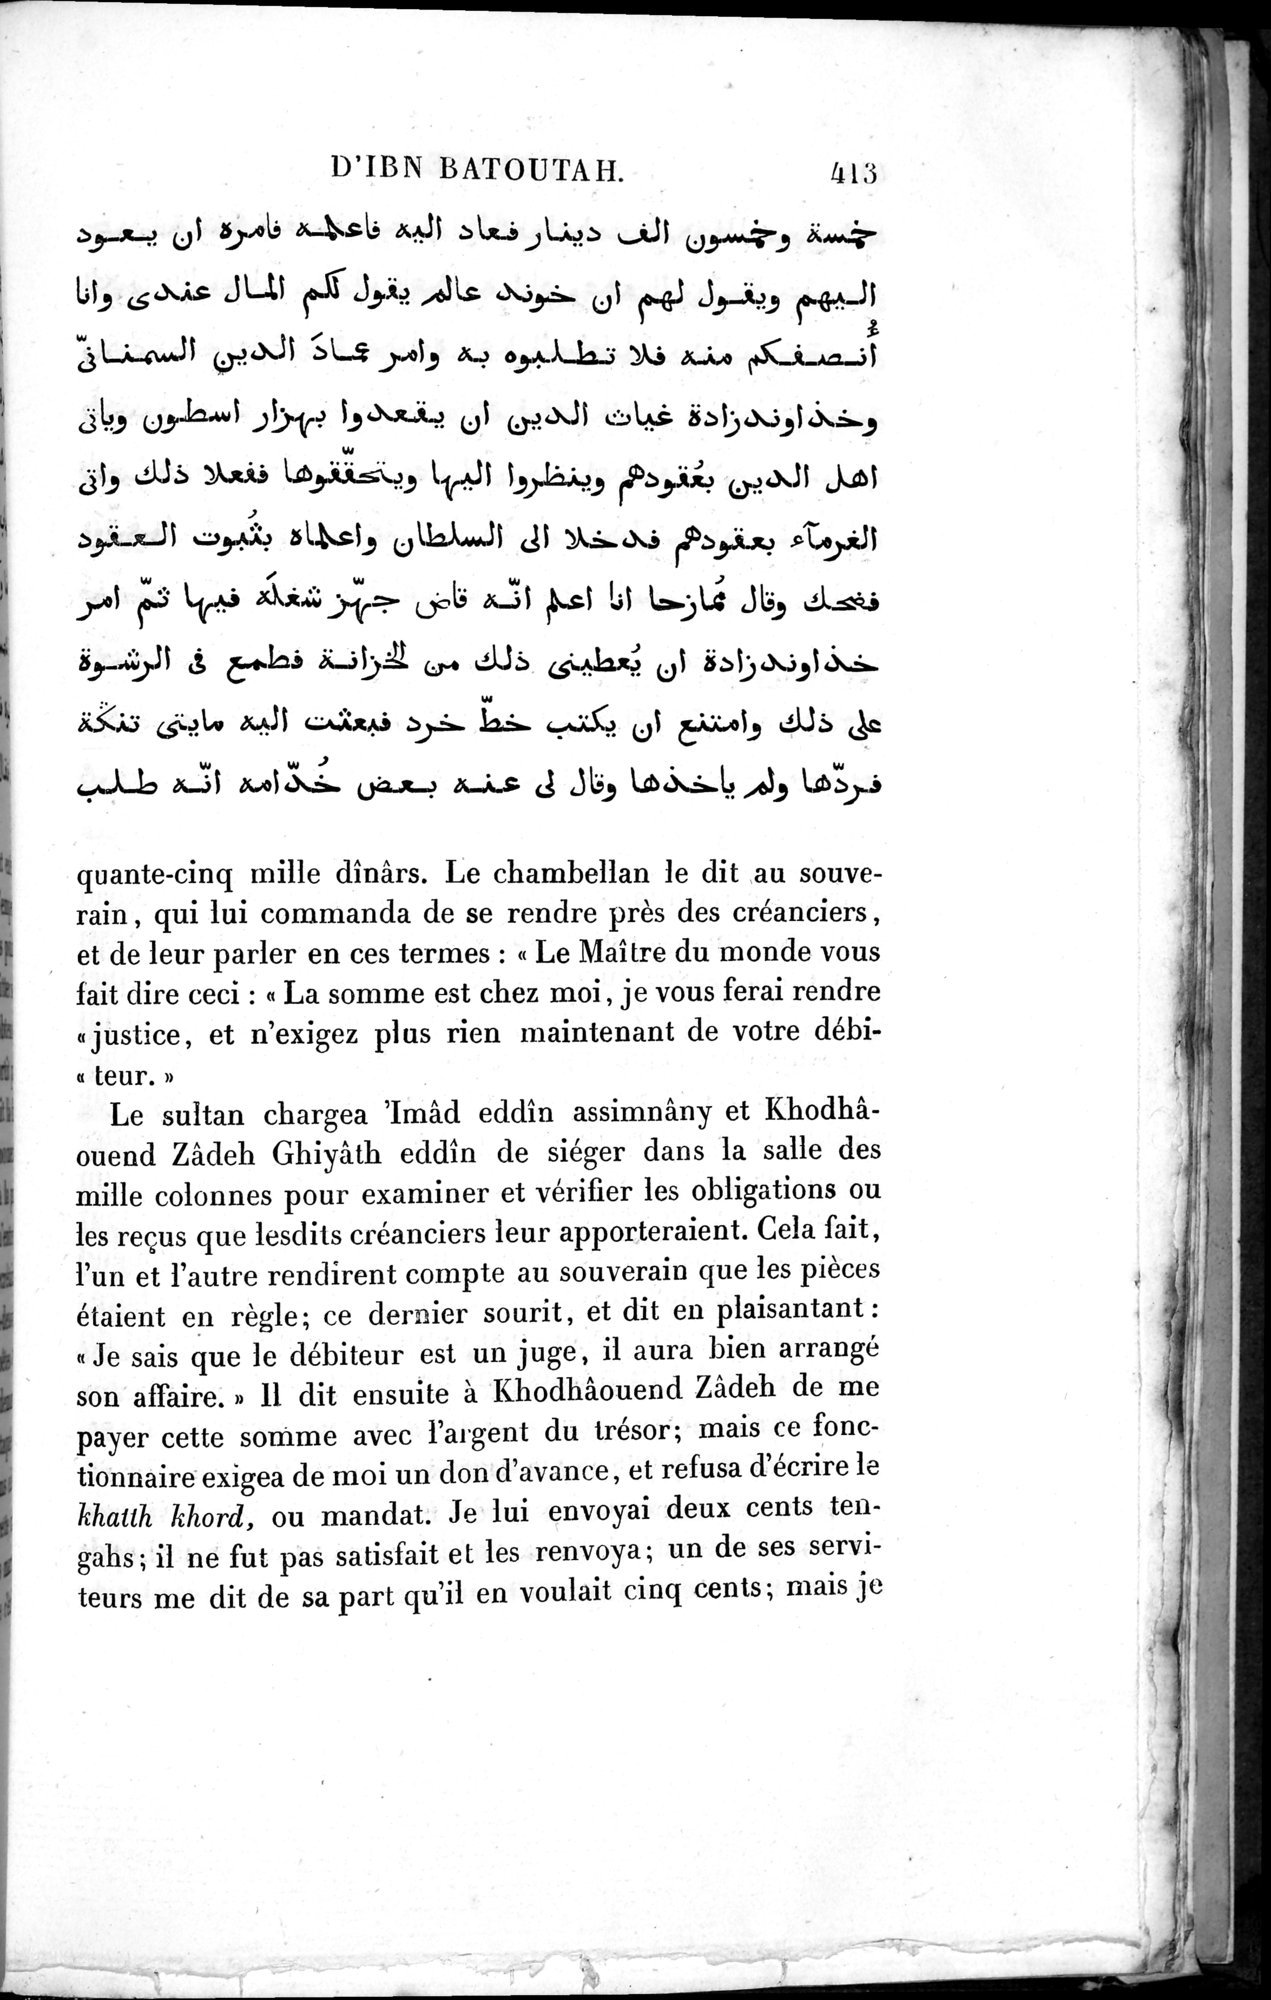 Voyages d'Ibn Batoutah : vol.3 / Page 453 (Grayscale High Resolution Image)